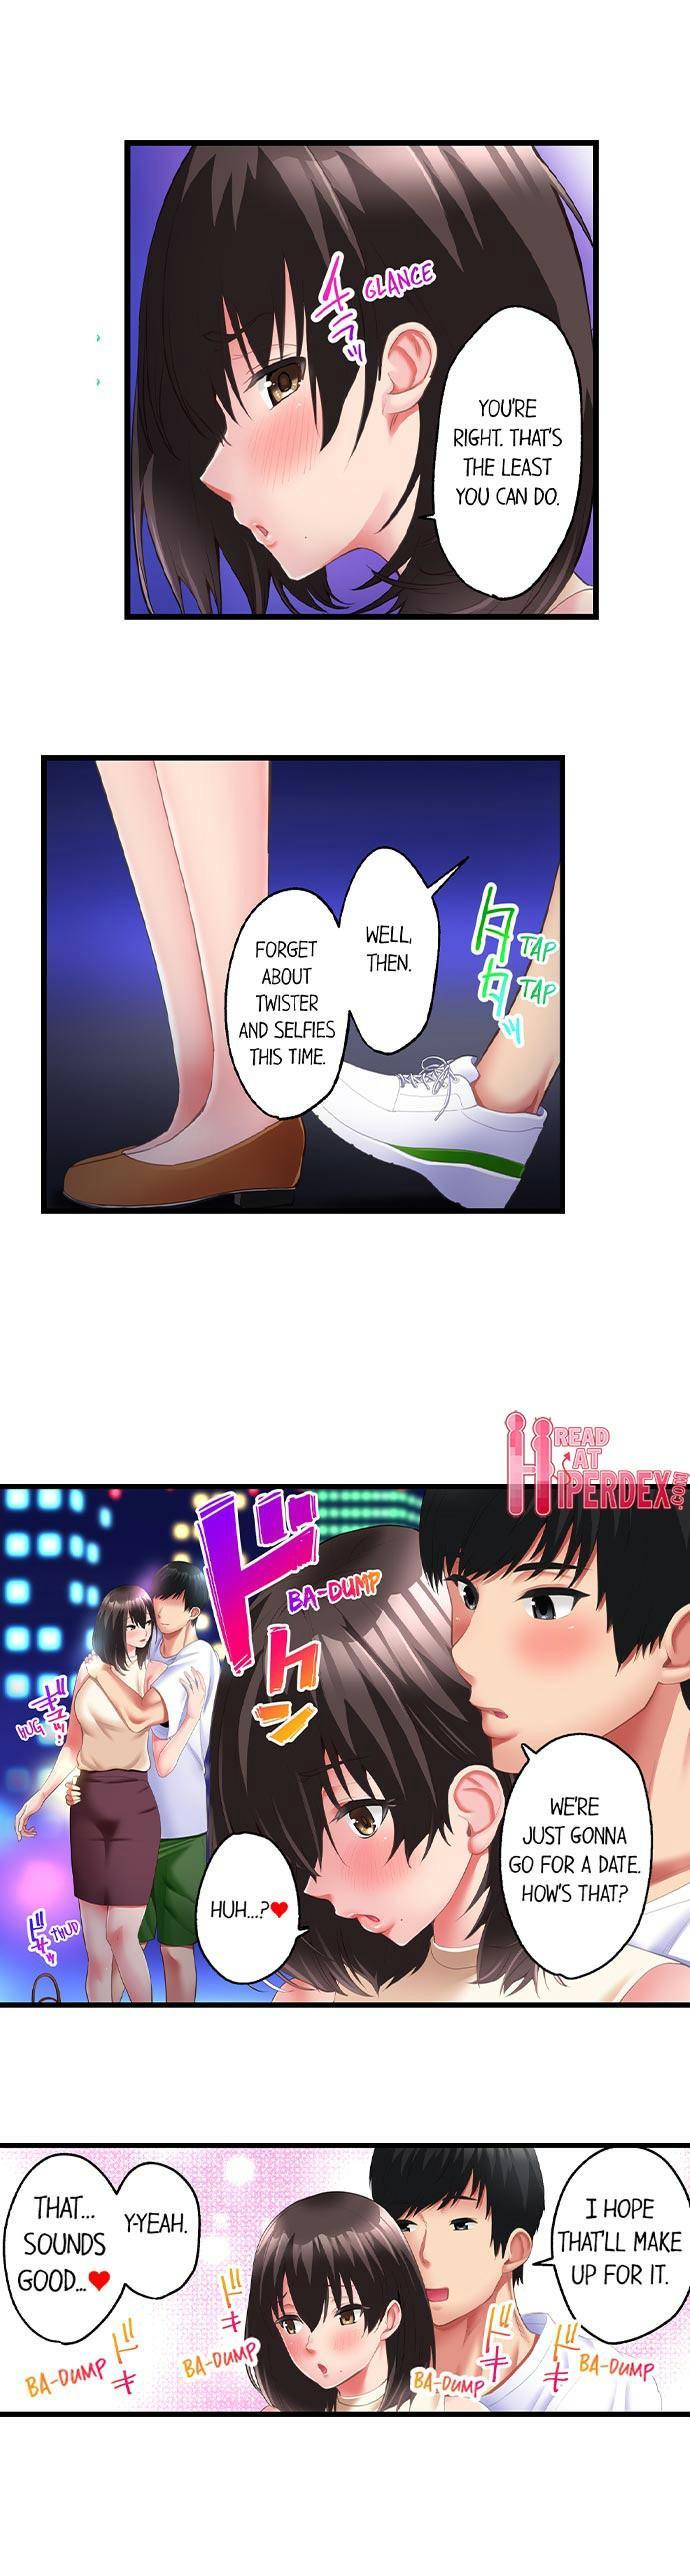 Freeteenporn [Kayanoi Ino] Busted by my Co-Worker 18/18 [English] Completed Oral Sex - Page 171